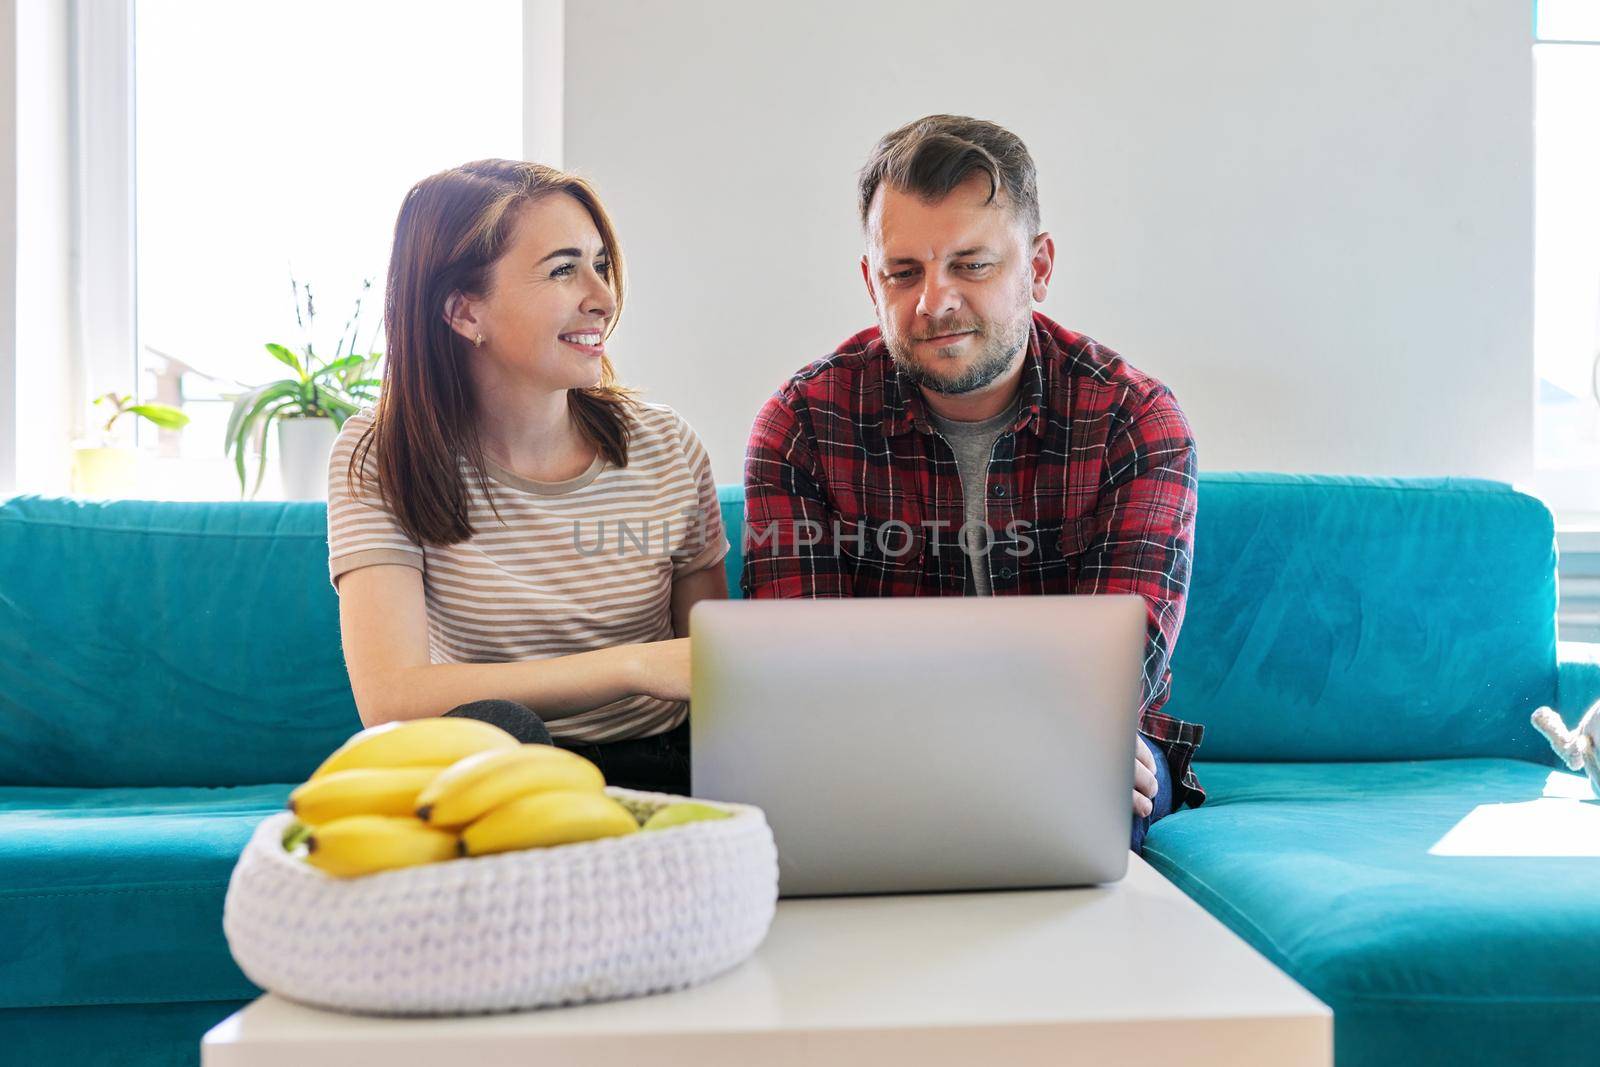 Middle aged couple sitting together at home on the couch looking into the laptop screen. Positive smiling husband and wife, lifestyle, relationship, technology concept